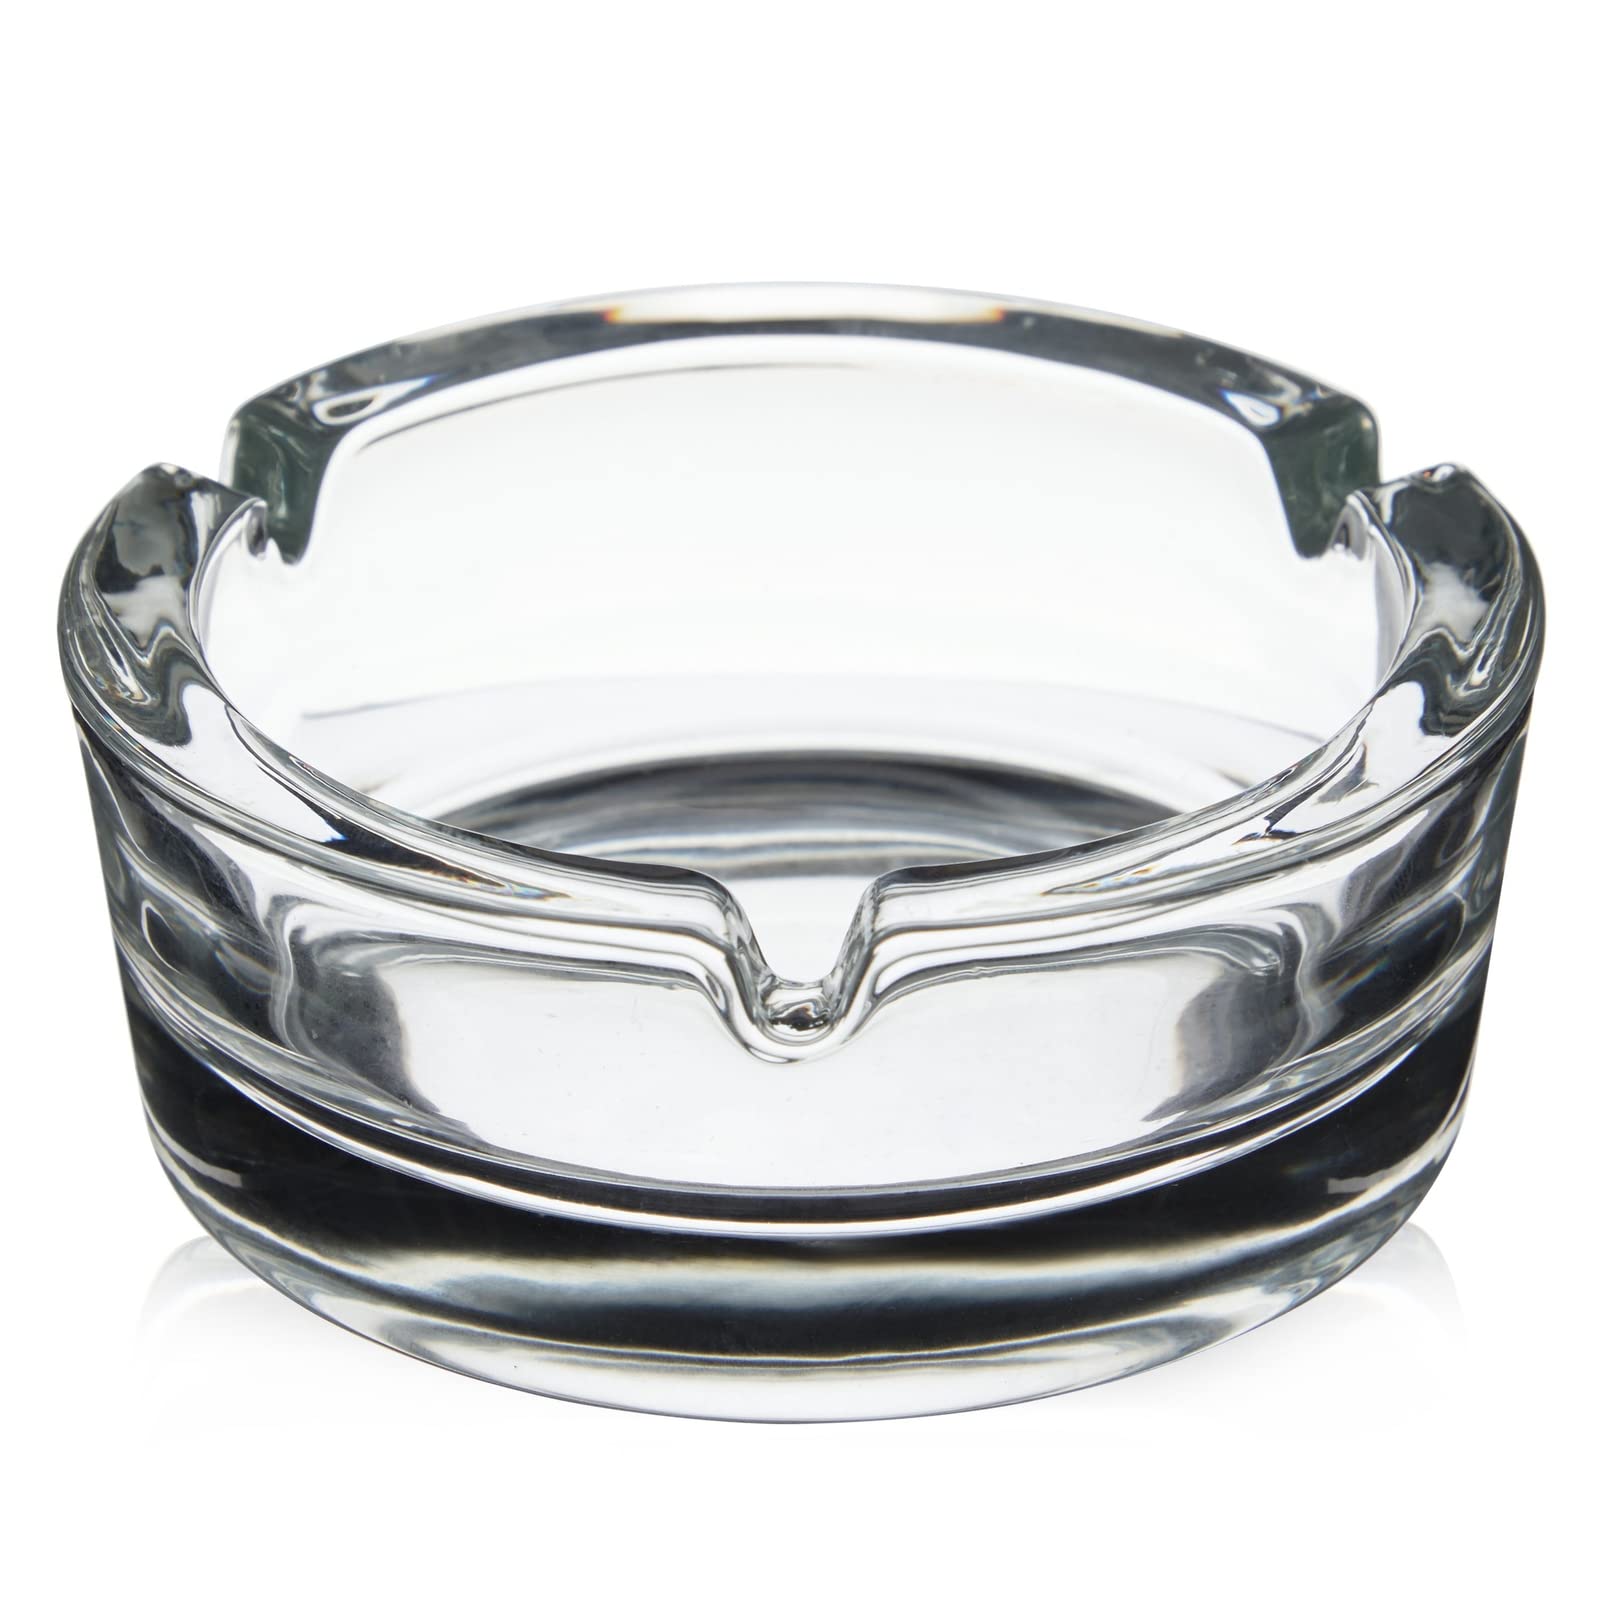 Juvale 6 Pack Bulk Clear Glass Ashtrays for Cigarettes and Cigars, Outdoor and Indoor Use (4 x 1.5 In)